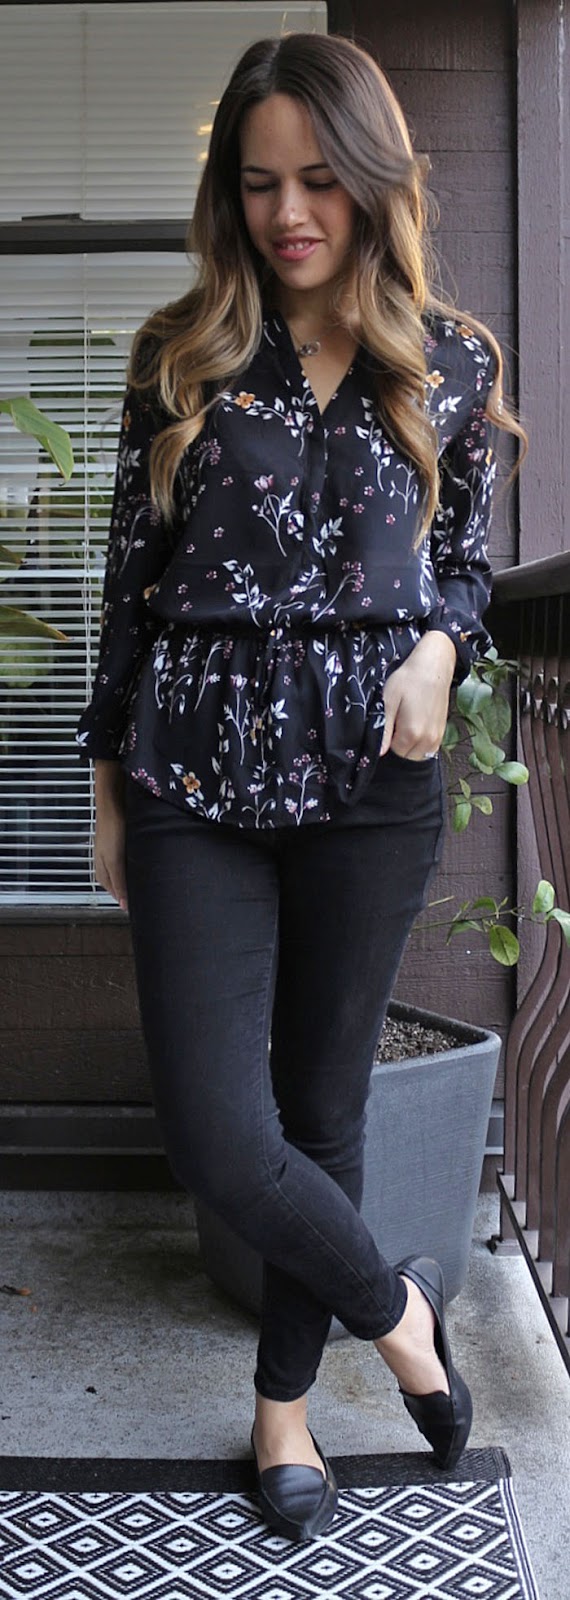 Jules in Flats - Dynamite Floral Peplum Blouse, Old Navy Rockstar Jeans